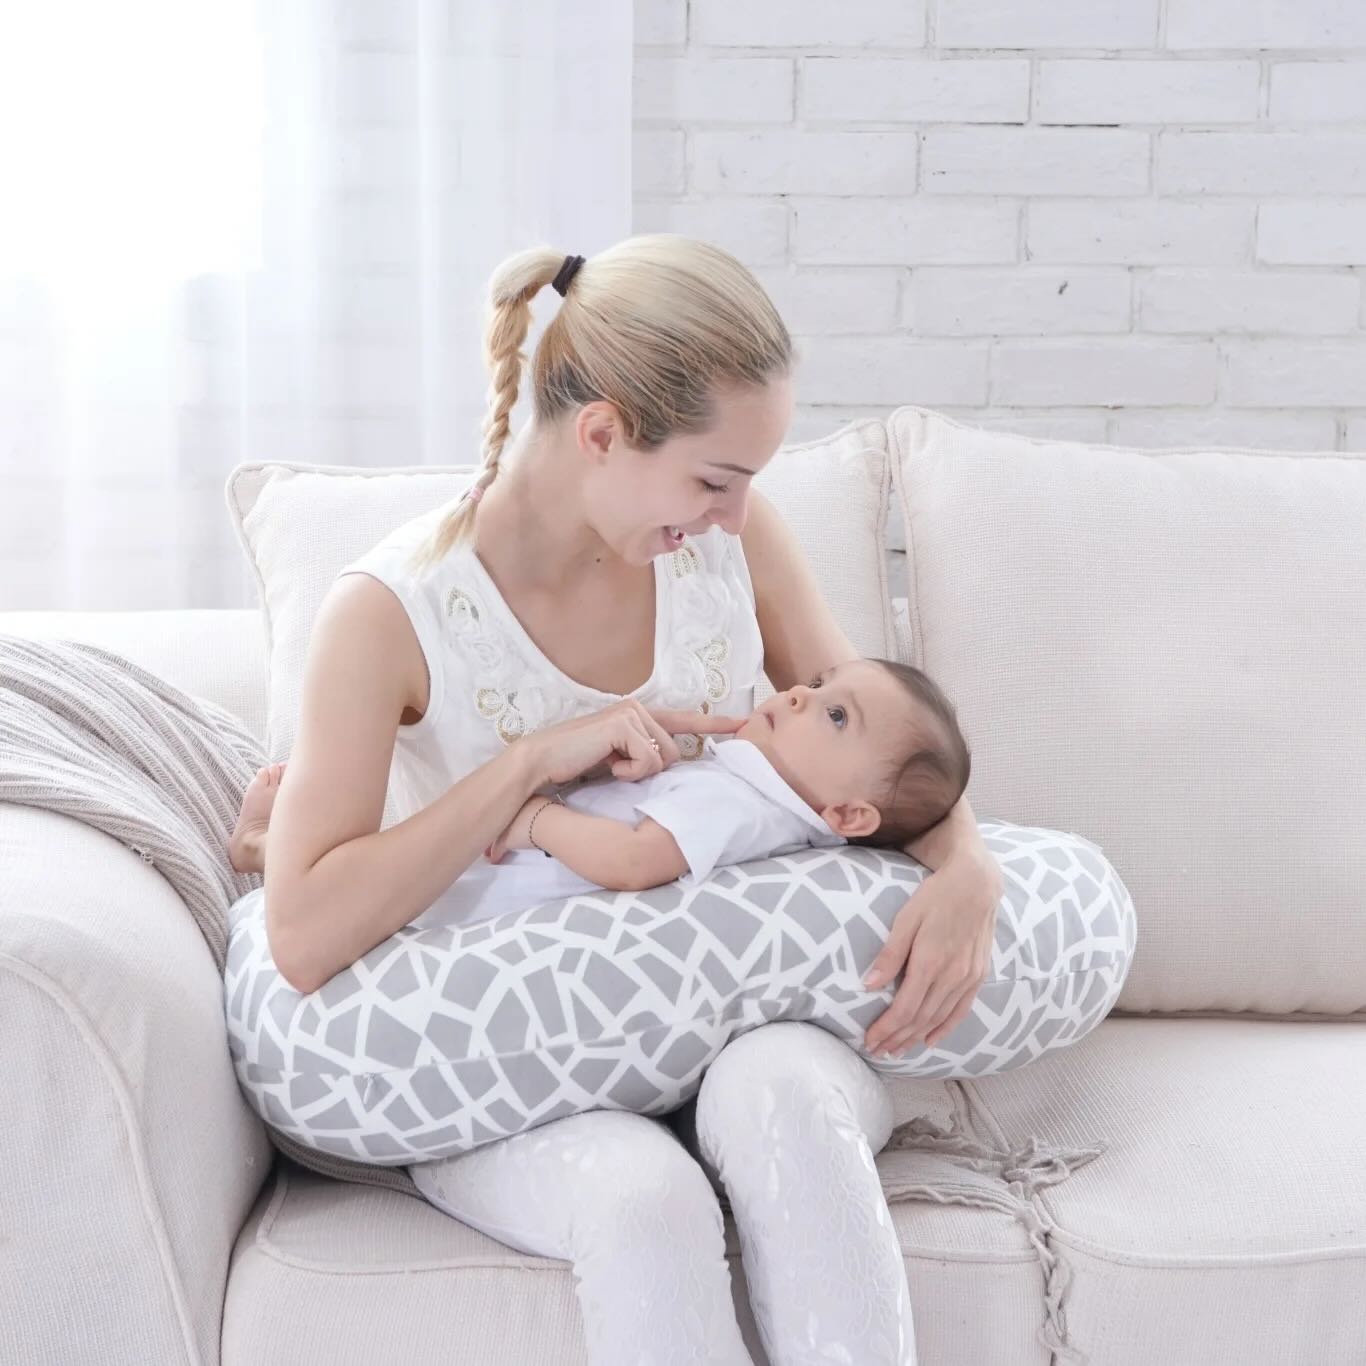 Breastfeeding Support Pillow Review: Find the Perfect Pillow for Nursing